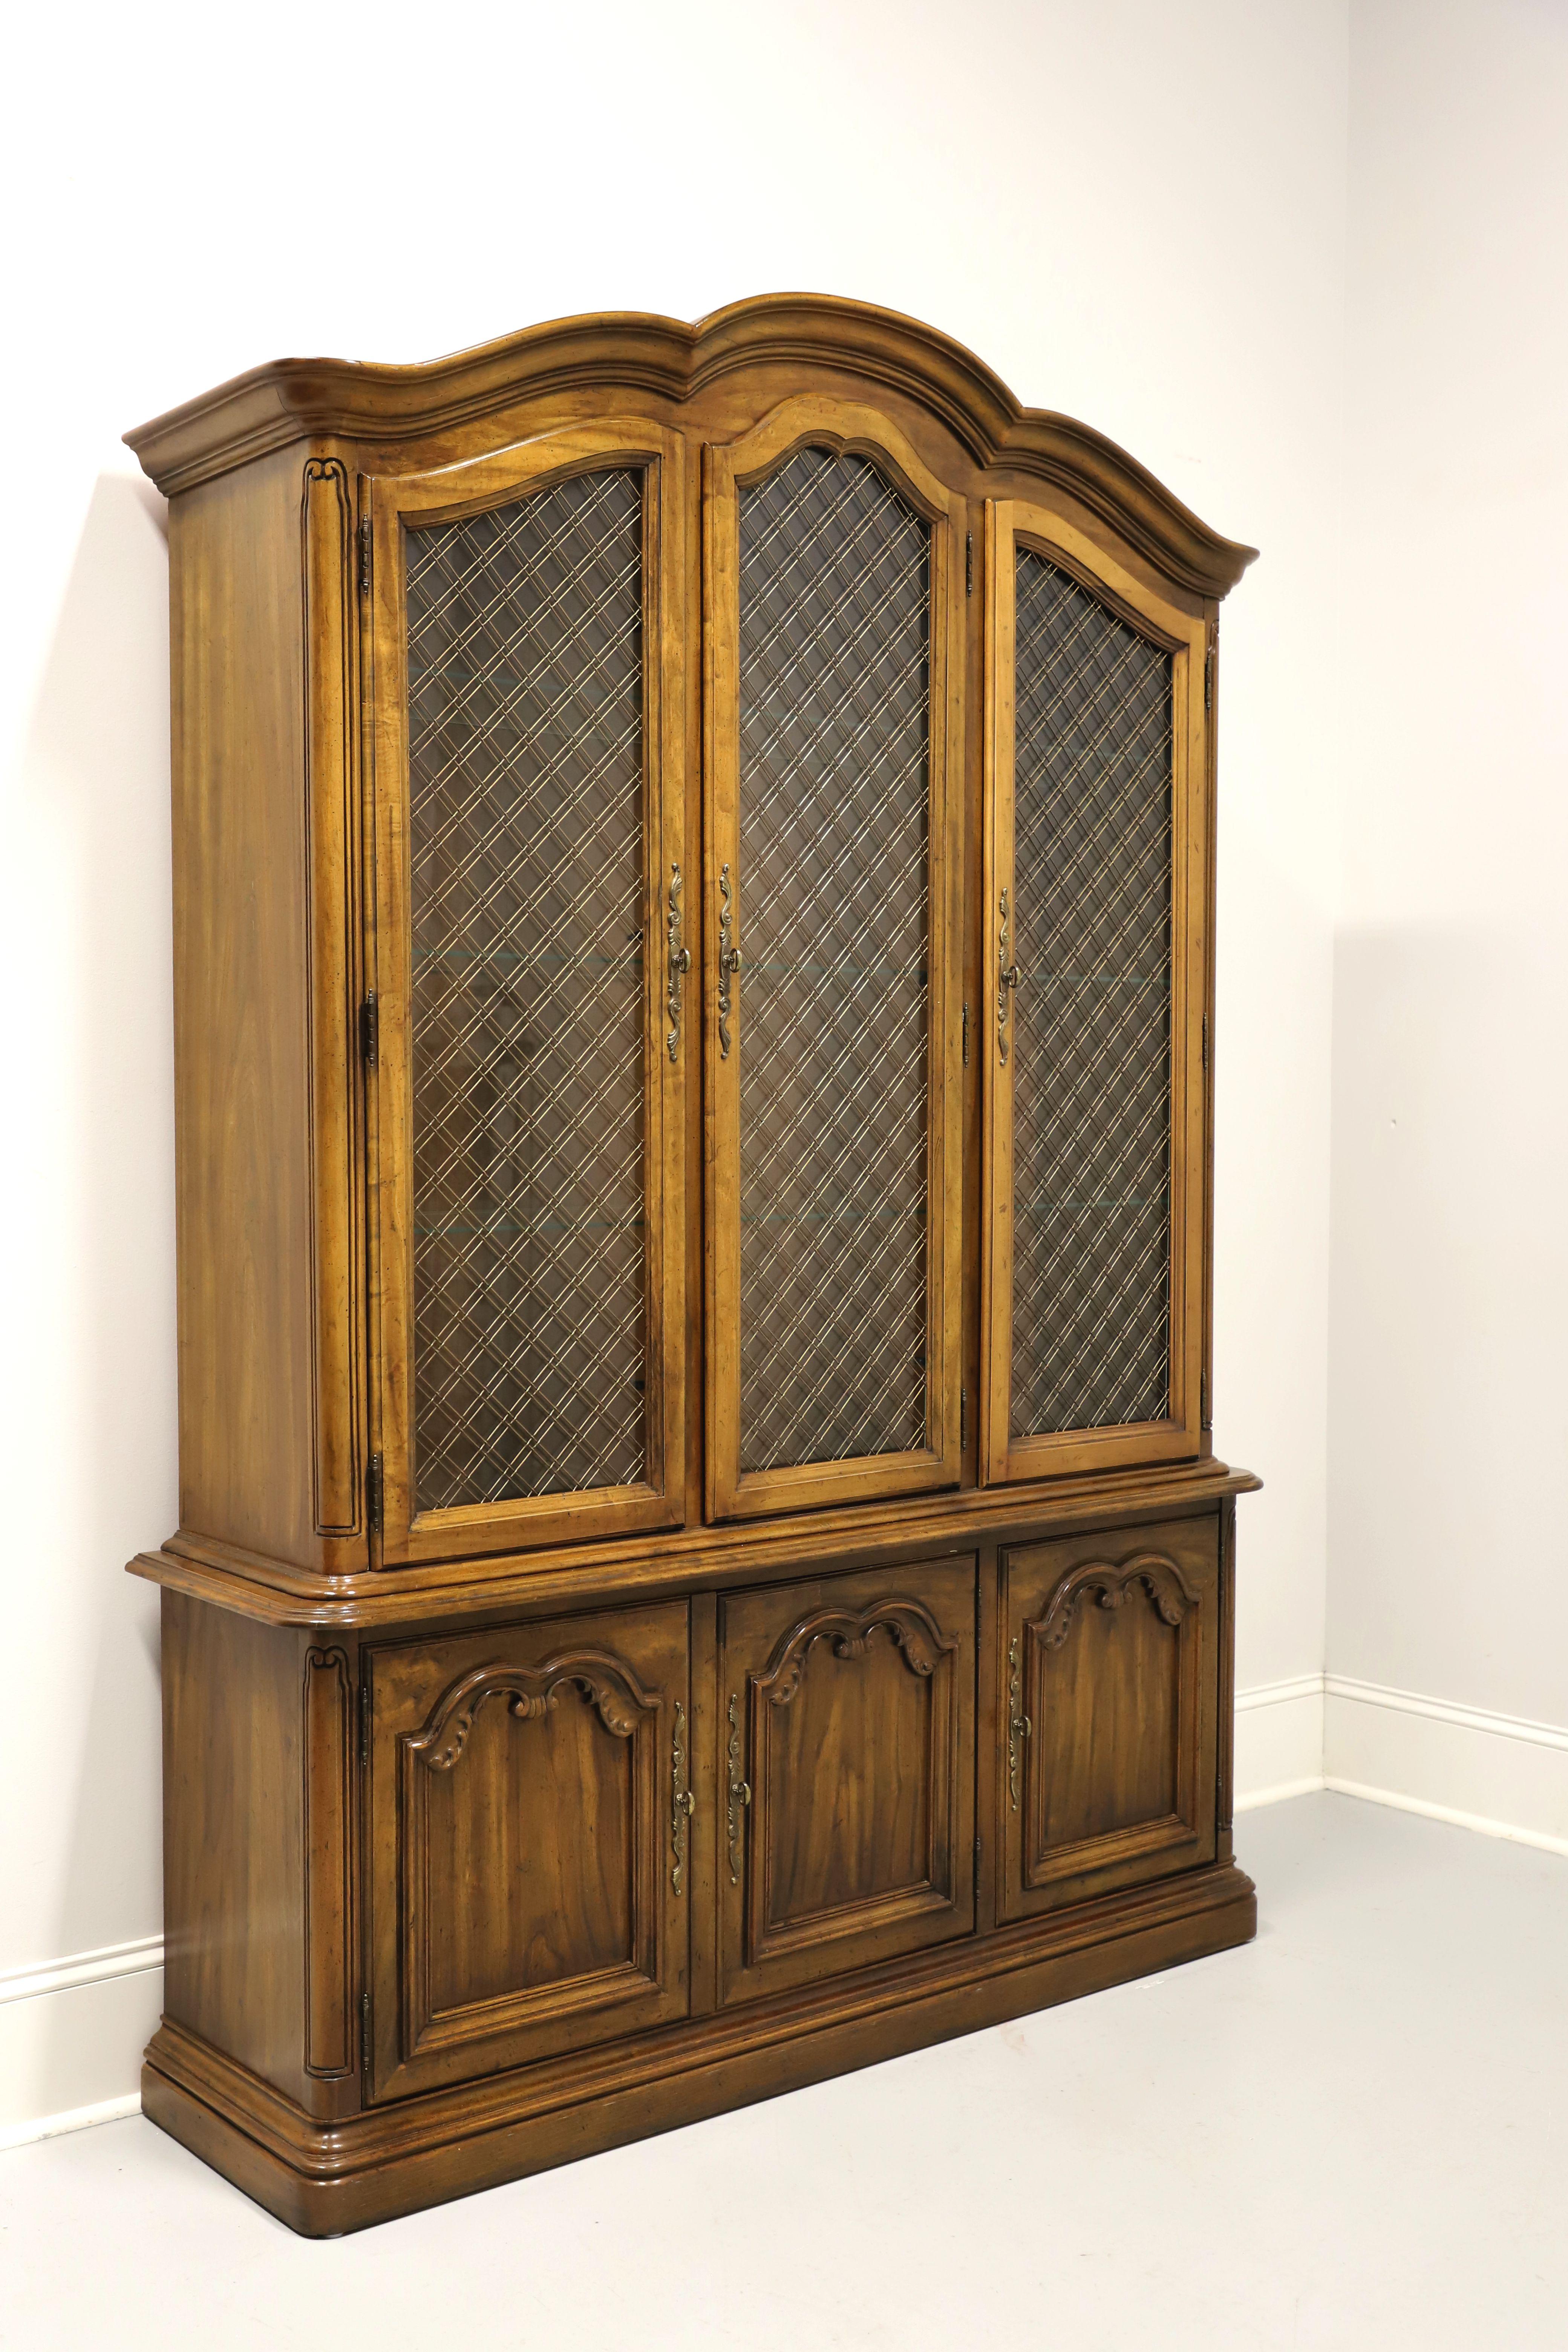 A china display cabinet in the French Country style by Drexel, from their Touraine II Collection. Pecan, or similar nutwood, brass hardware, arched top with crown molding, decoratively carved details, rounded corners, and solid base. Upper cabinet